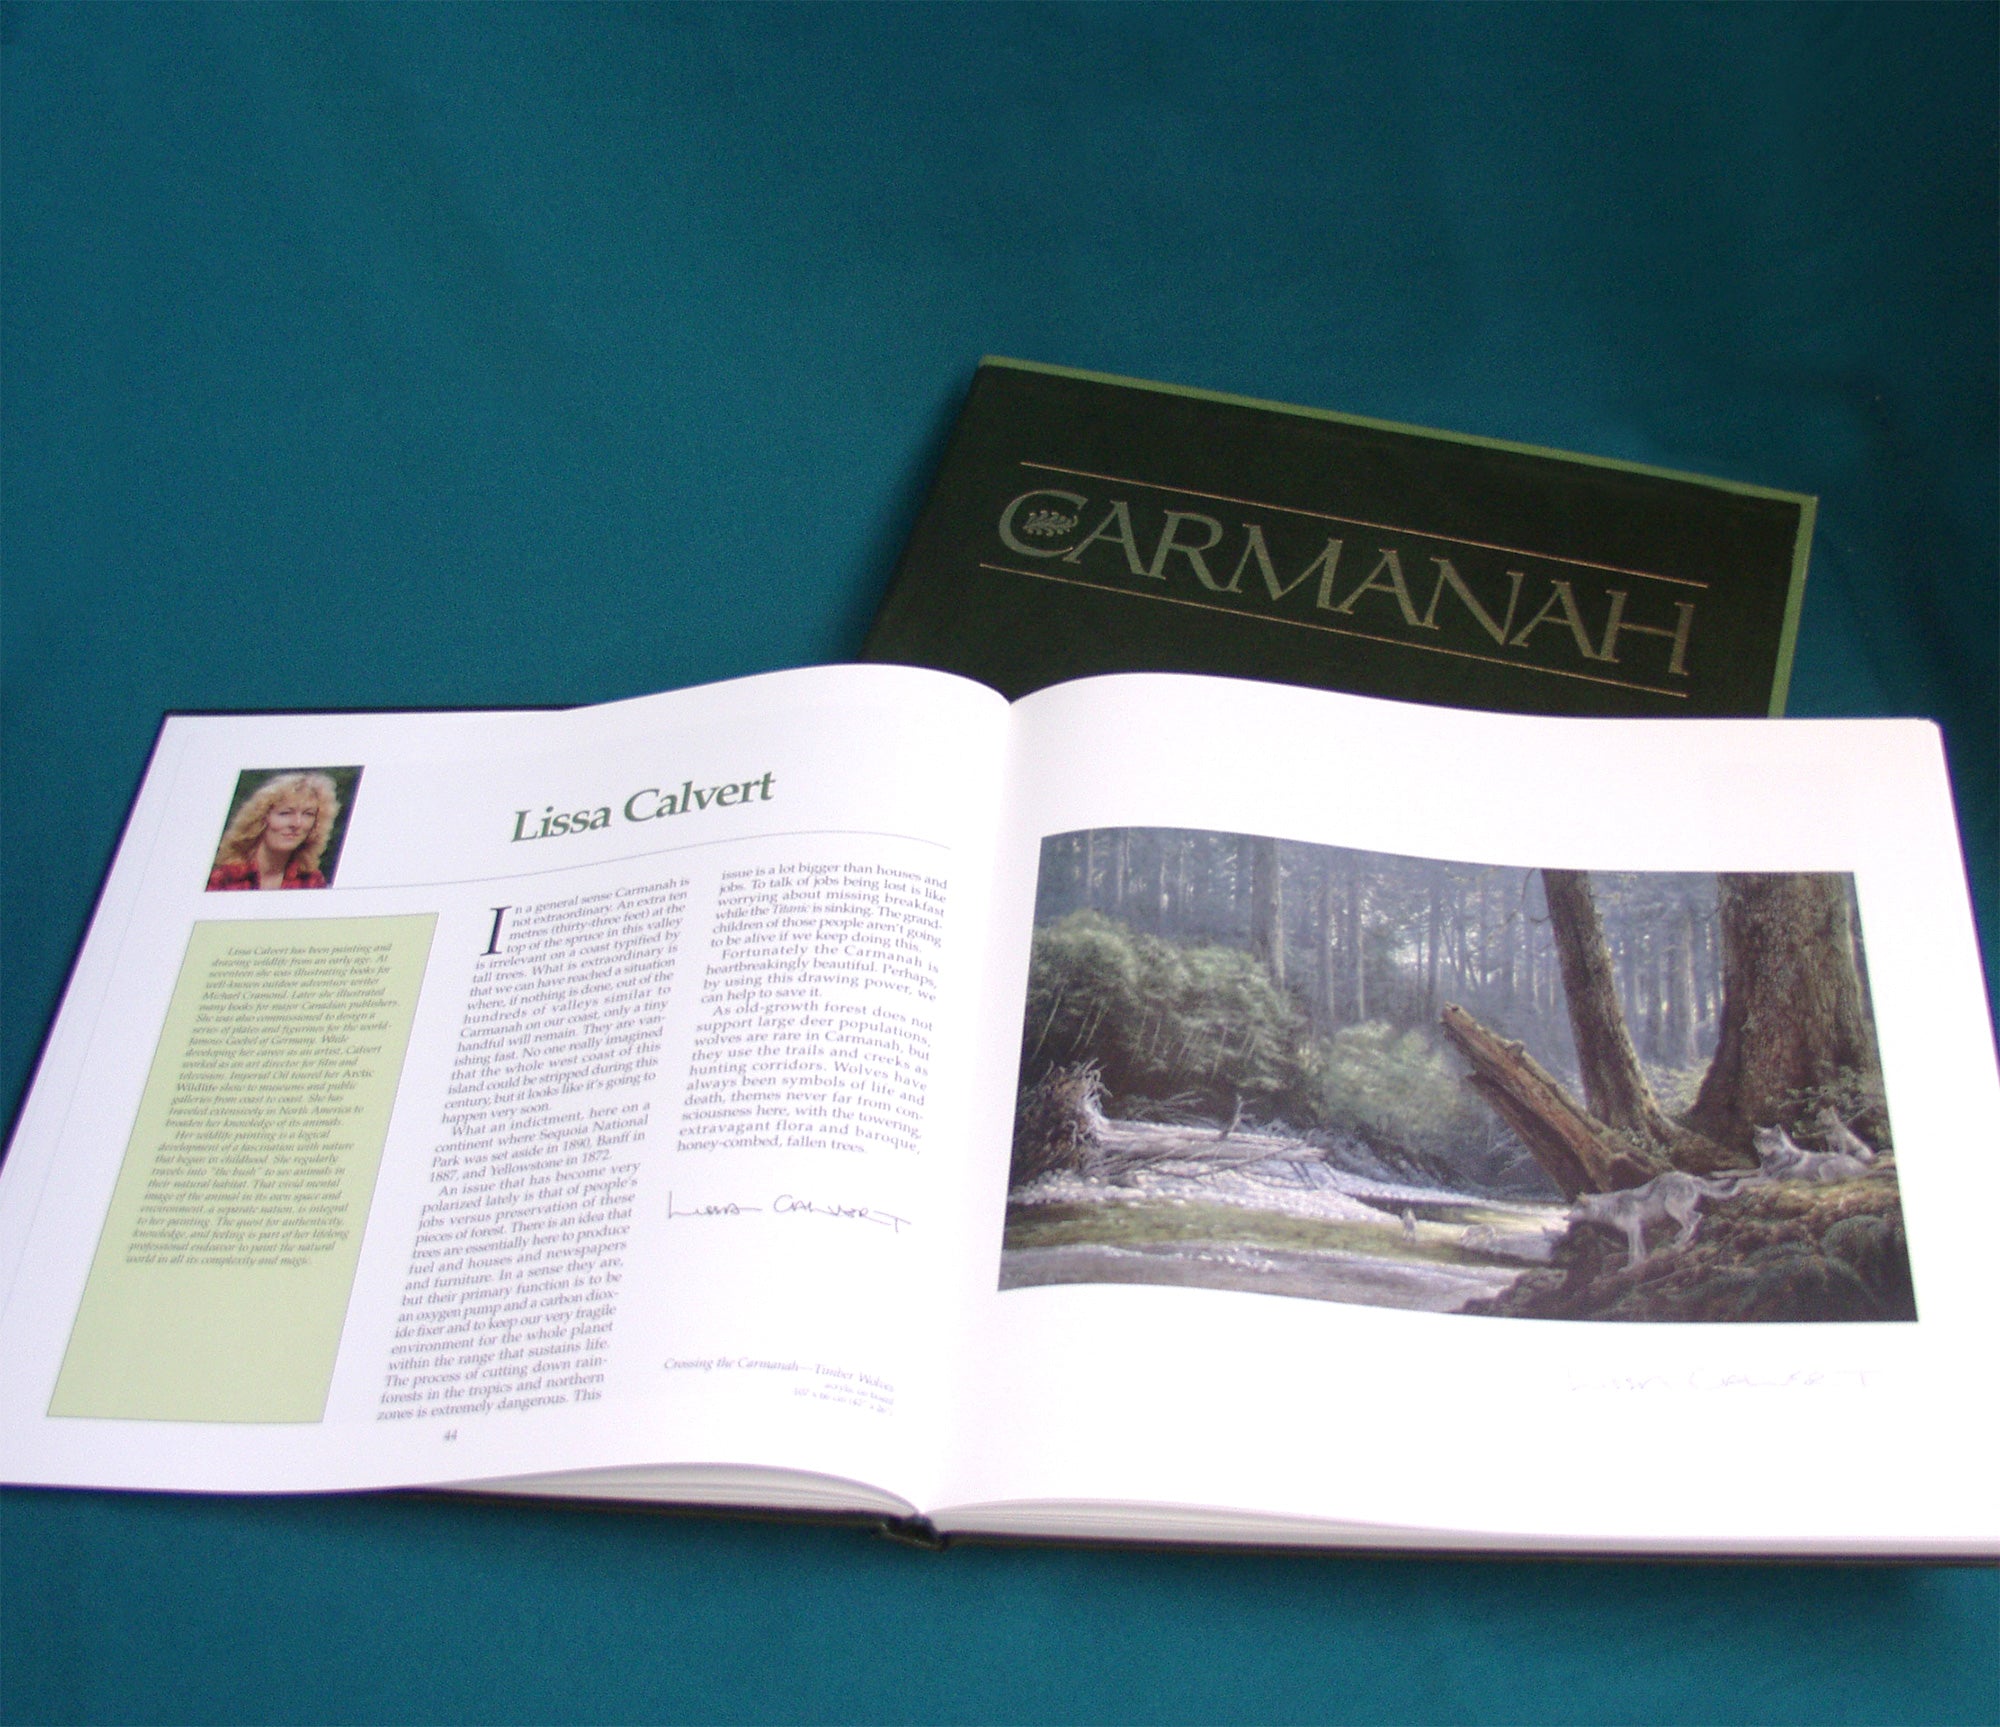 A shot of the inside of the book - there is a photo of writer Lissa Calvert on  the right on top of text, and a photo a river bank on the next page. End of image description.